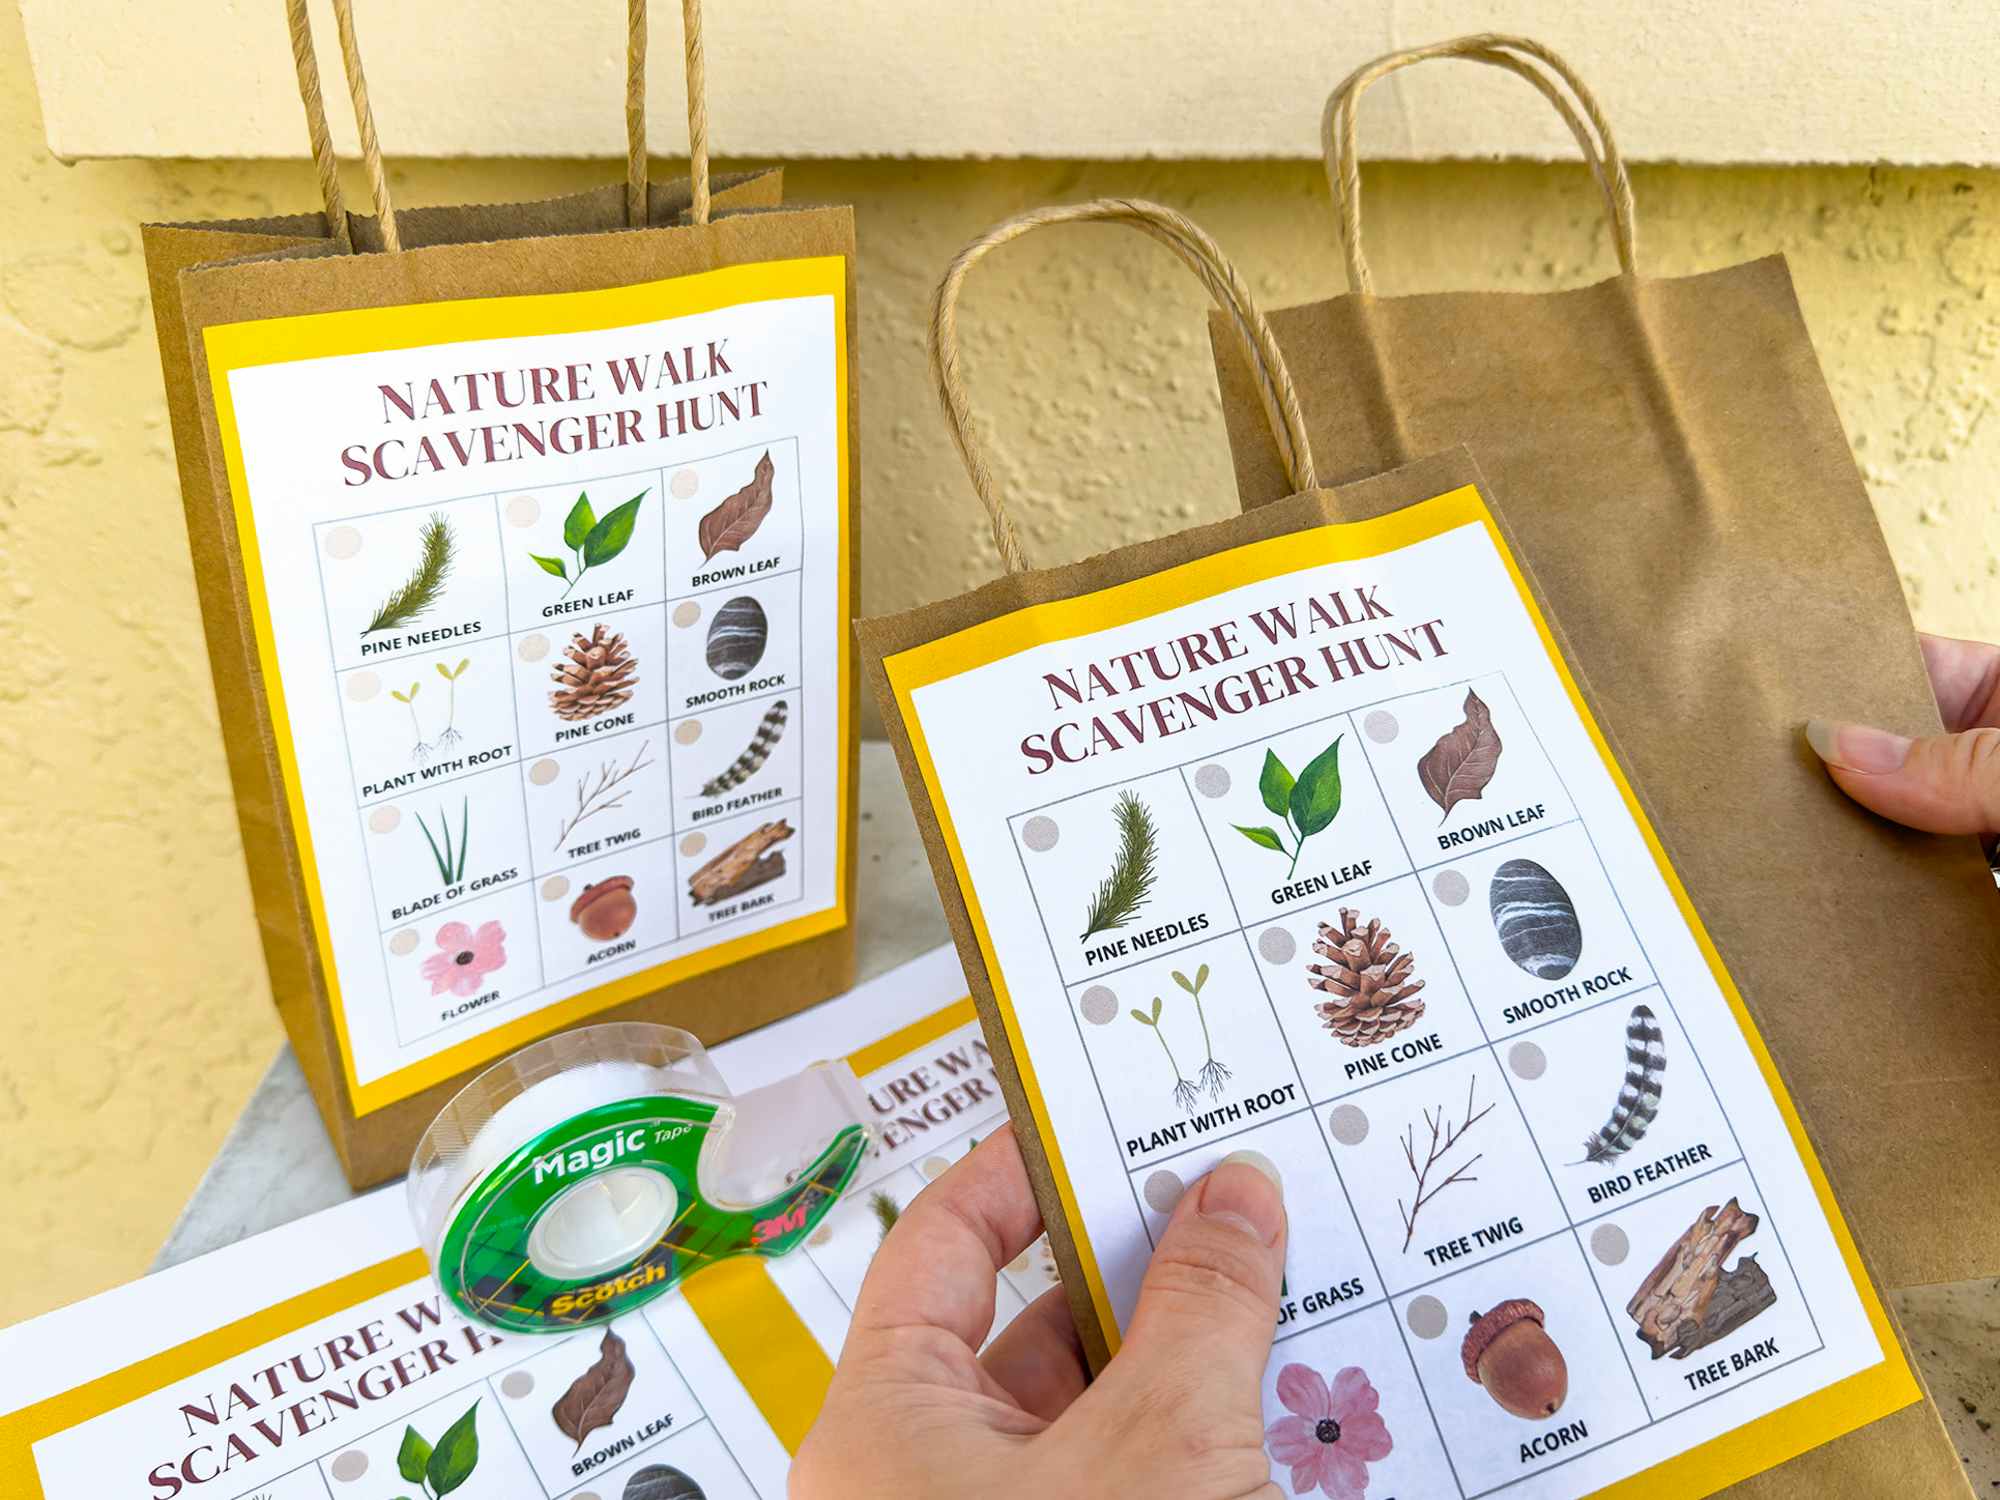 Someone putting together some nature walk scavenger hunt bags for a kids activity